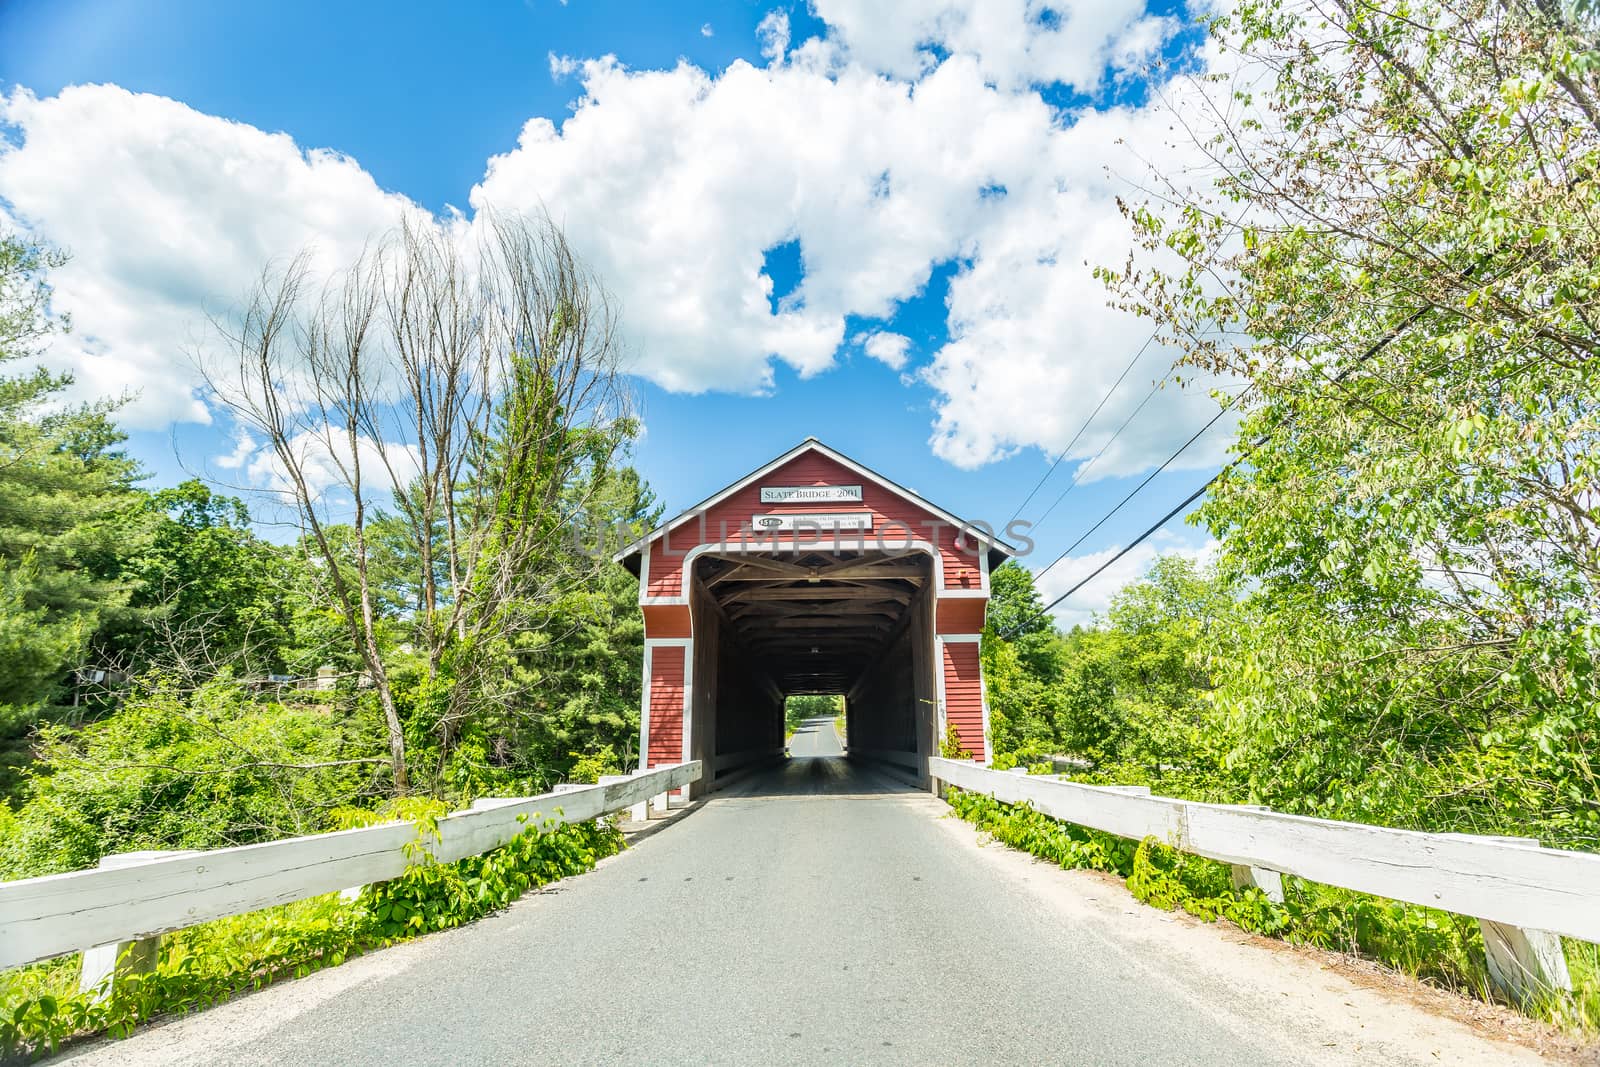 The Slate Covered Bridge is a wooden covered bridge which carries the Westport Village Road over the Ashuelot River in Westport, a village of Swanzey, New Hampshire.